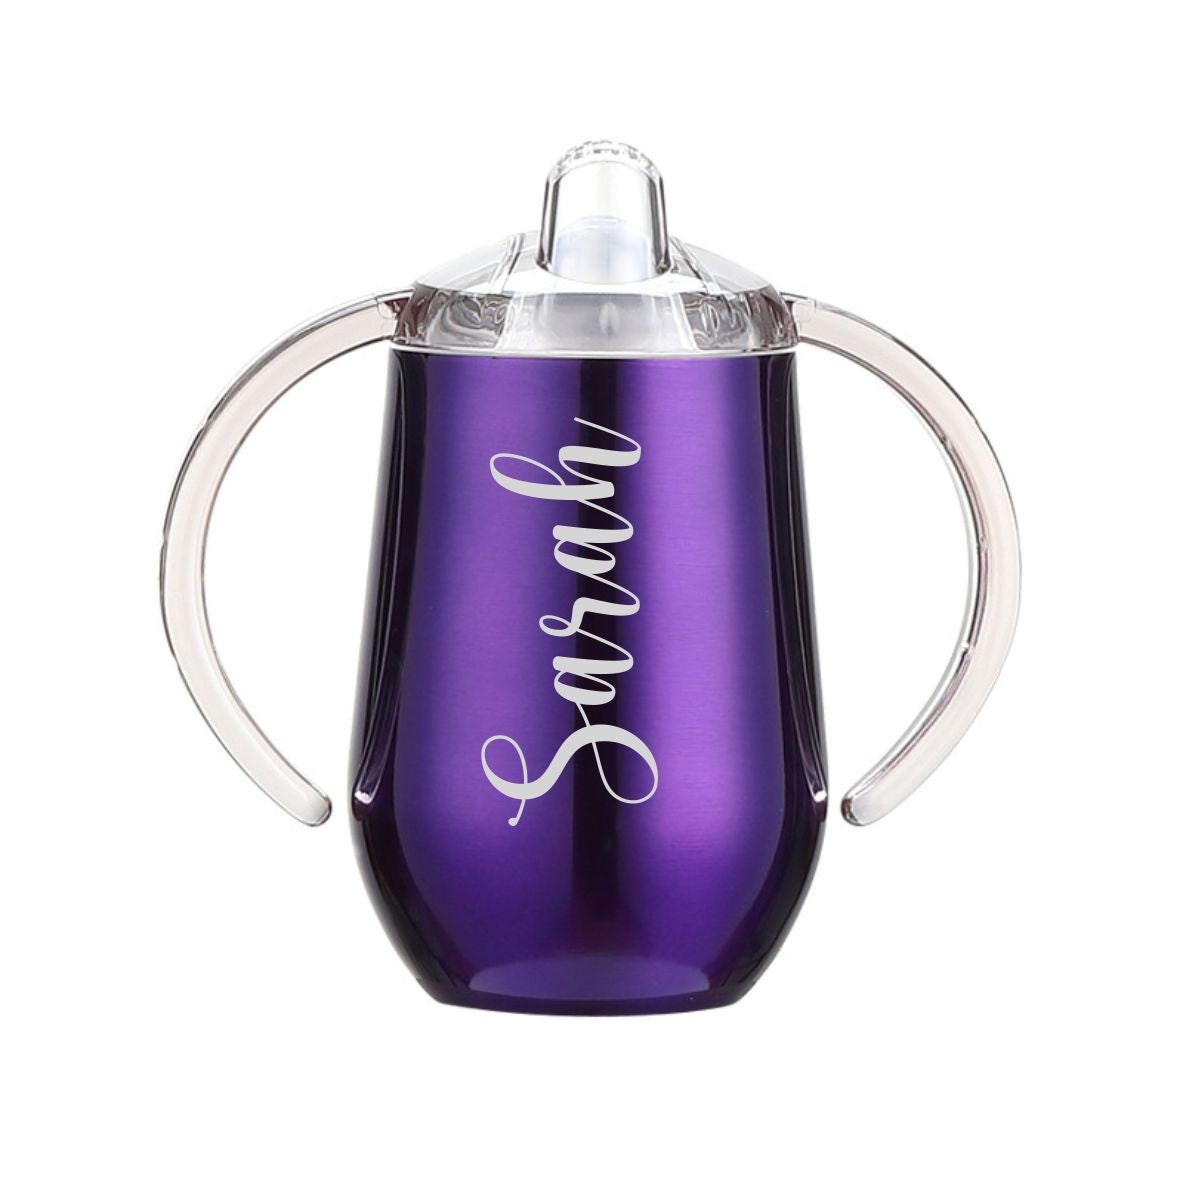 Laser Engraved 10oz Sippy Cup Tumbler, Personalized Stainless